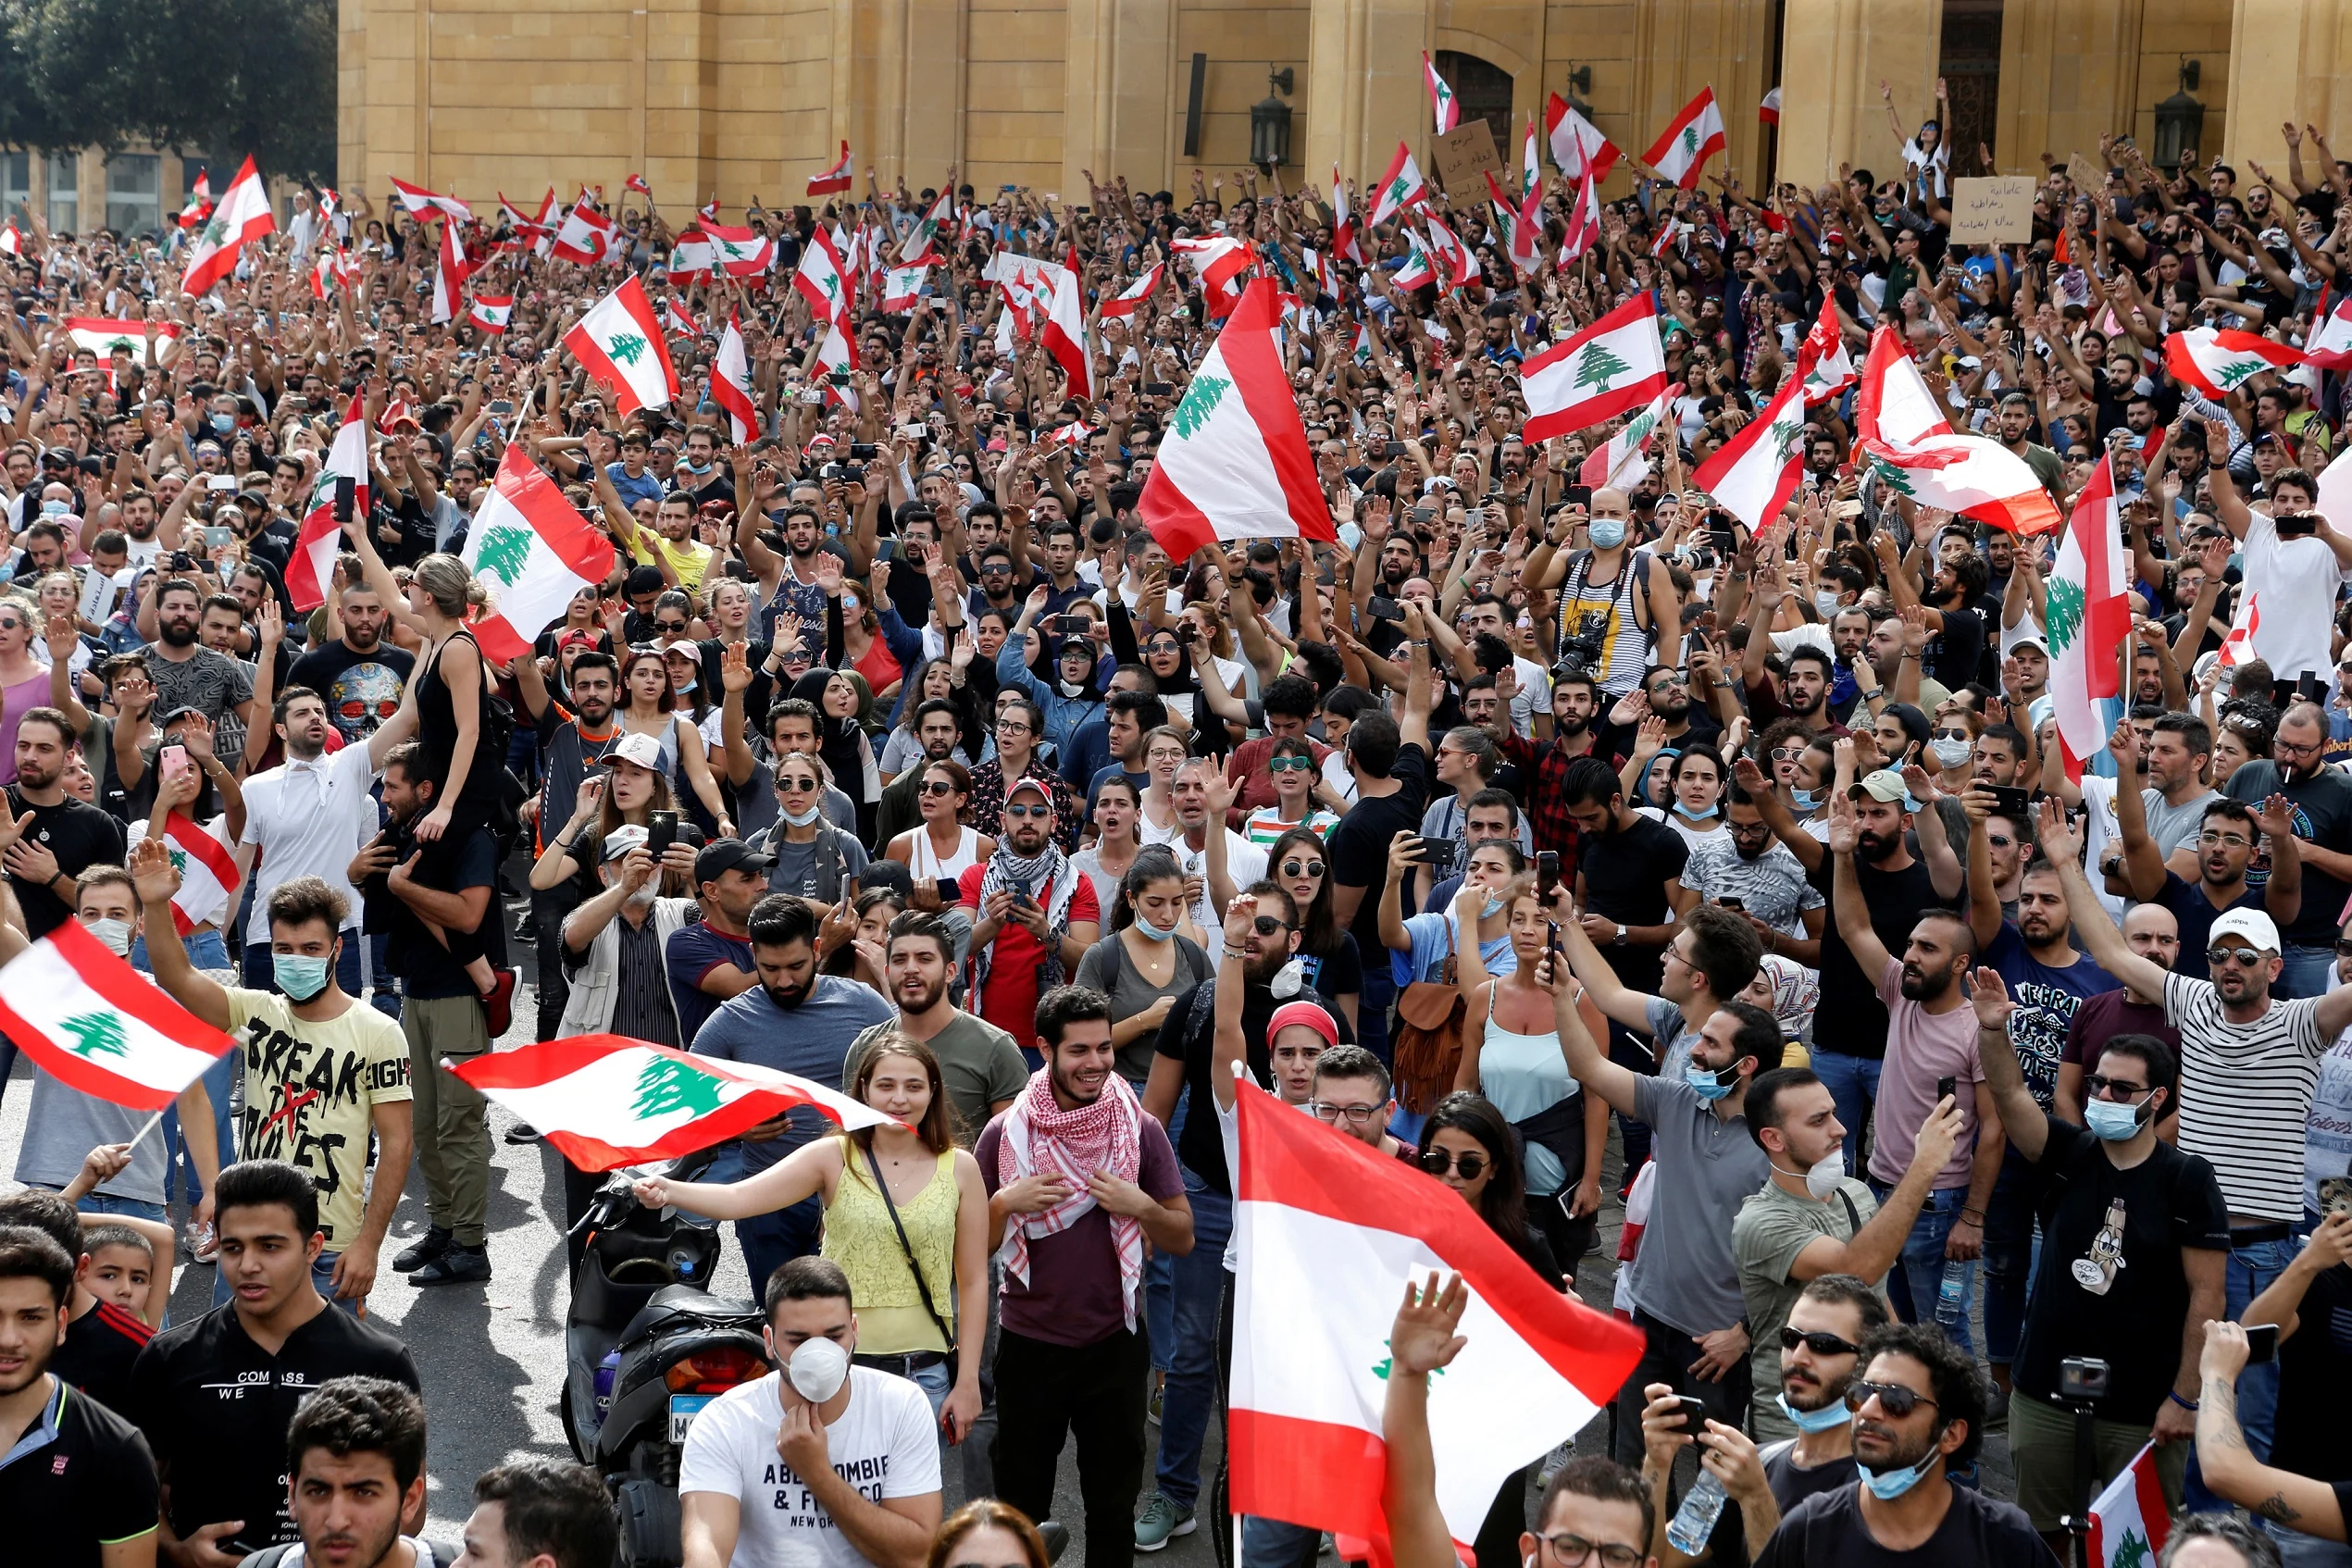 Demonstrators Hold Lebanese Flags As They Gather During A Protest Over Deteriorating Economic Situation, In Beirut